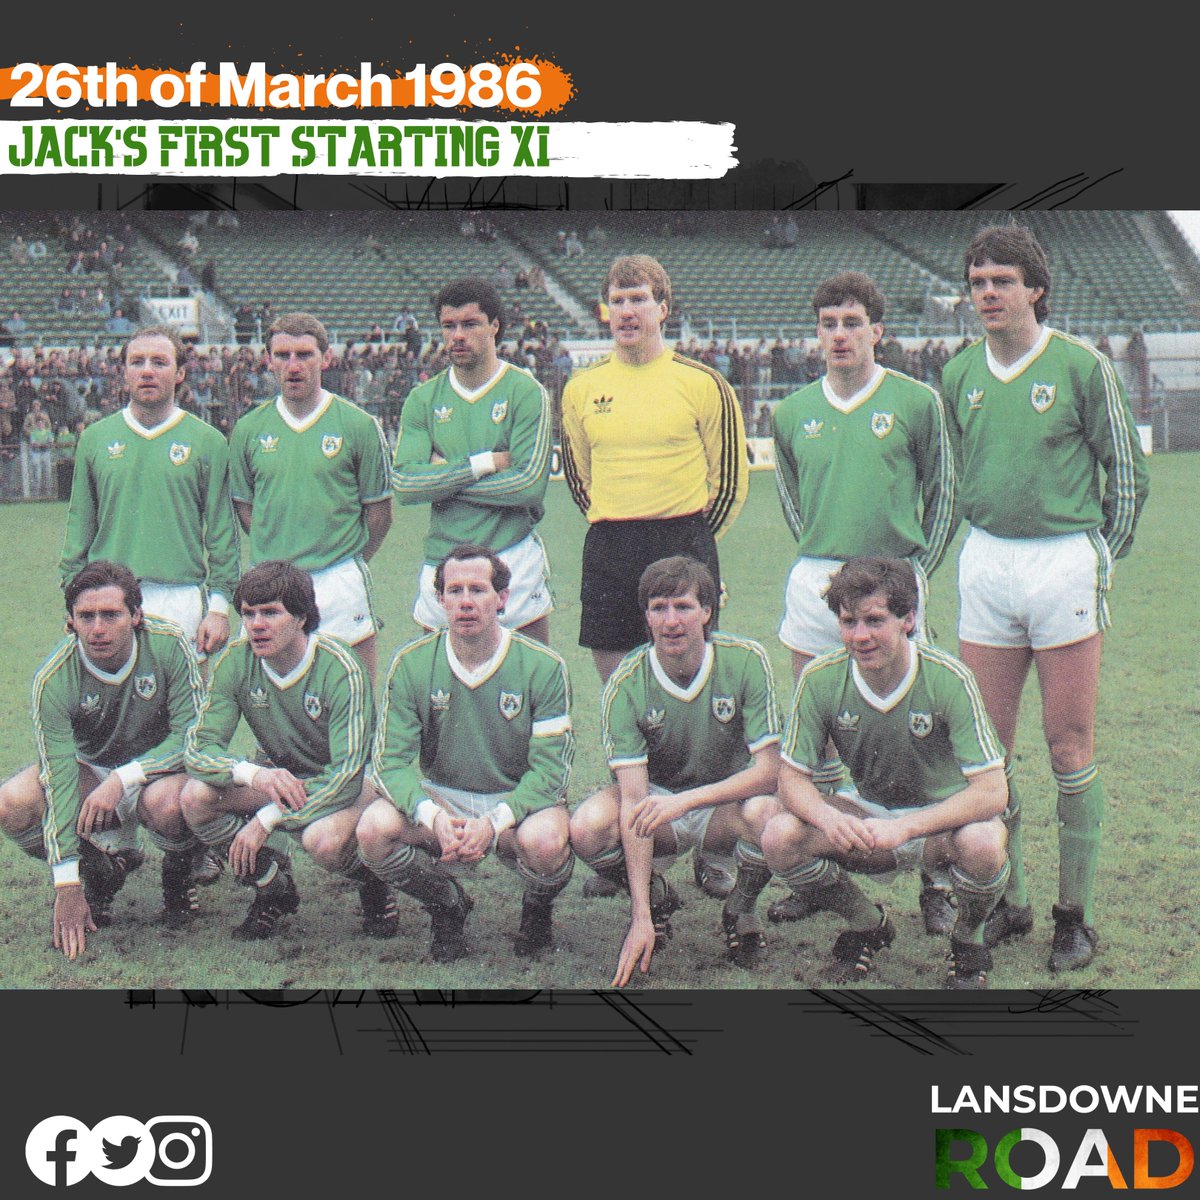 On this day in 1986, the Boys in Green set off on a journey that would place them firmly on the World stage, Jack's first game. It didn't get off to the best of starts with a 0-1 loss to Wales! #legend #irishfootball #ireland